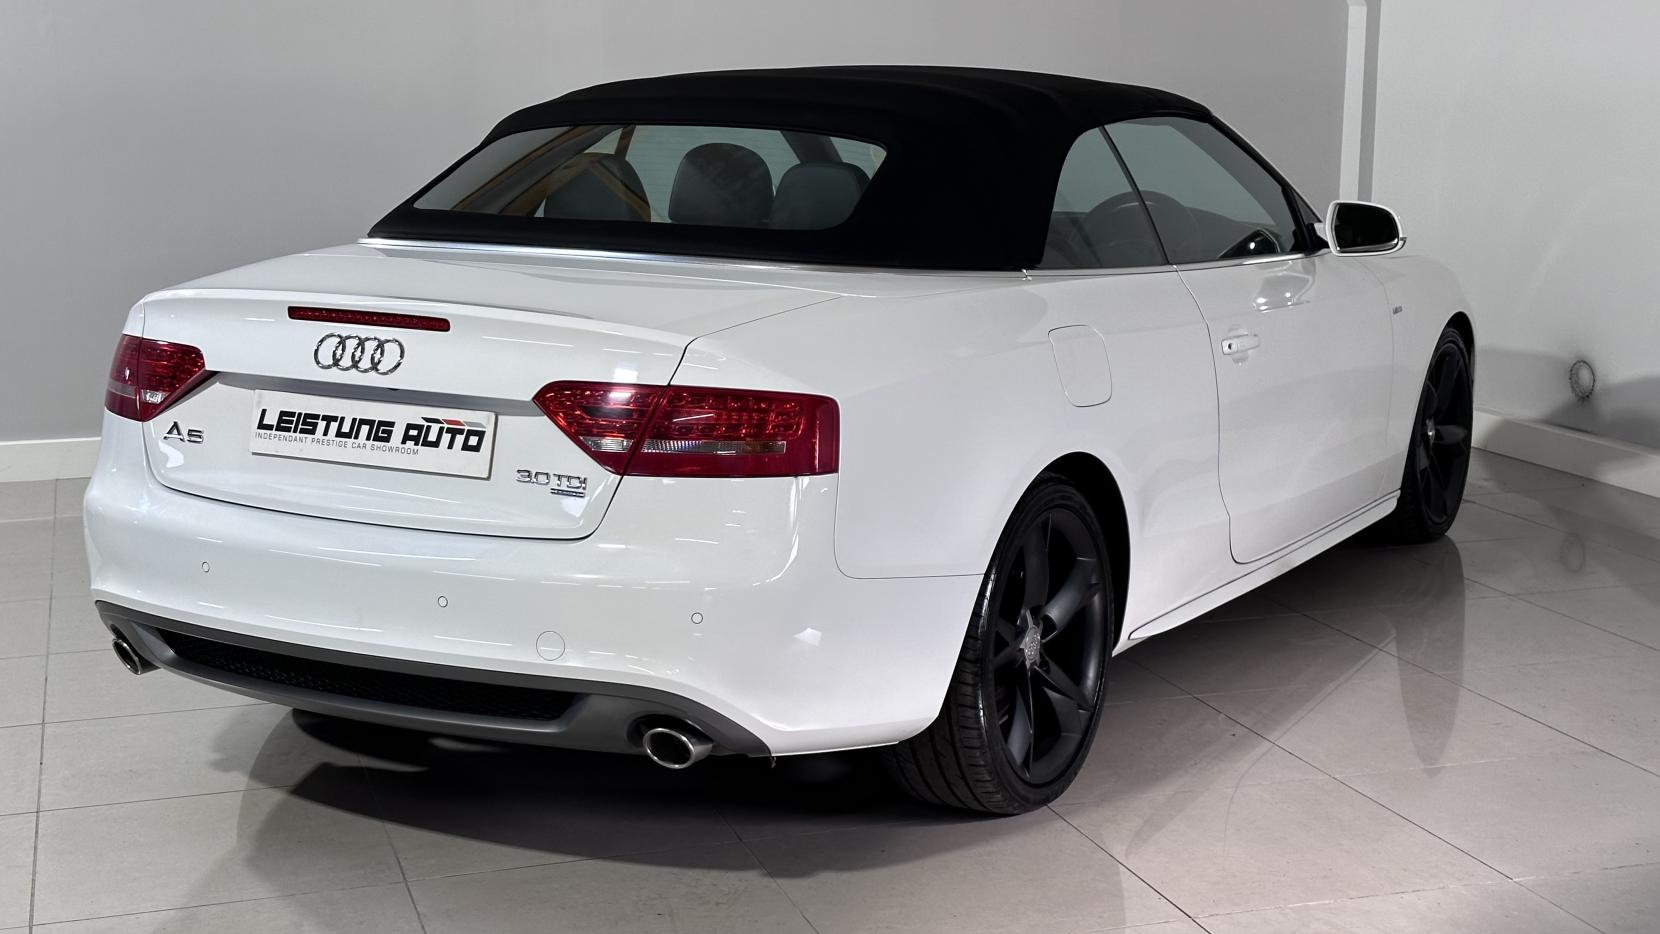 Audi A5 Cabriolet 3.0 TDI V6 S line Convertible 2dr Diesel S Tronic quattro Euro 4 (240 ps)